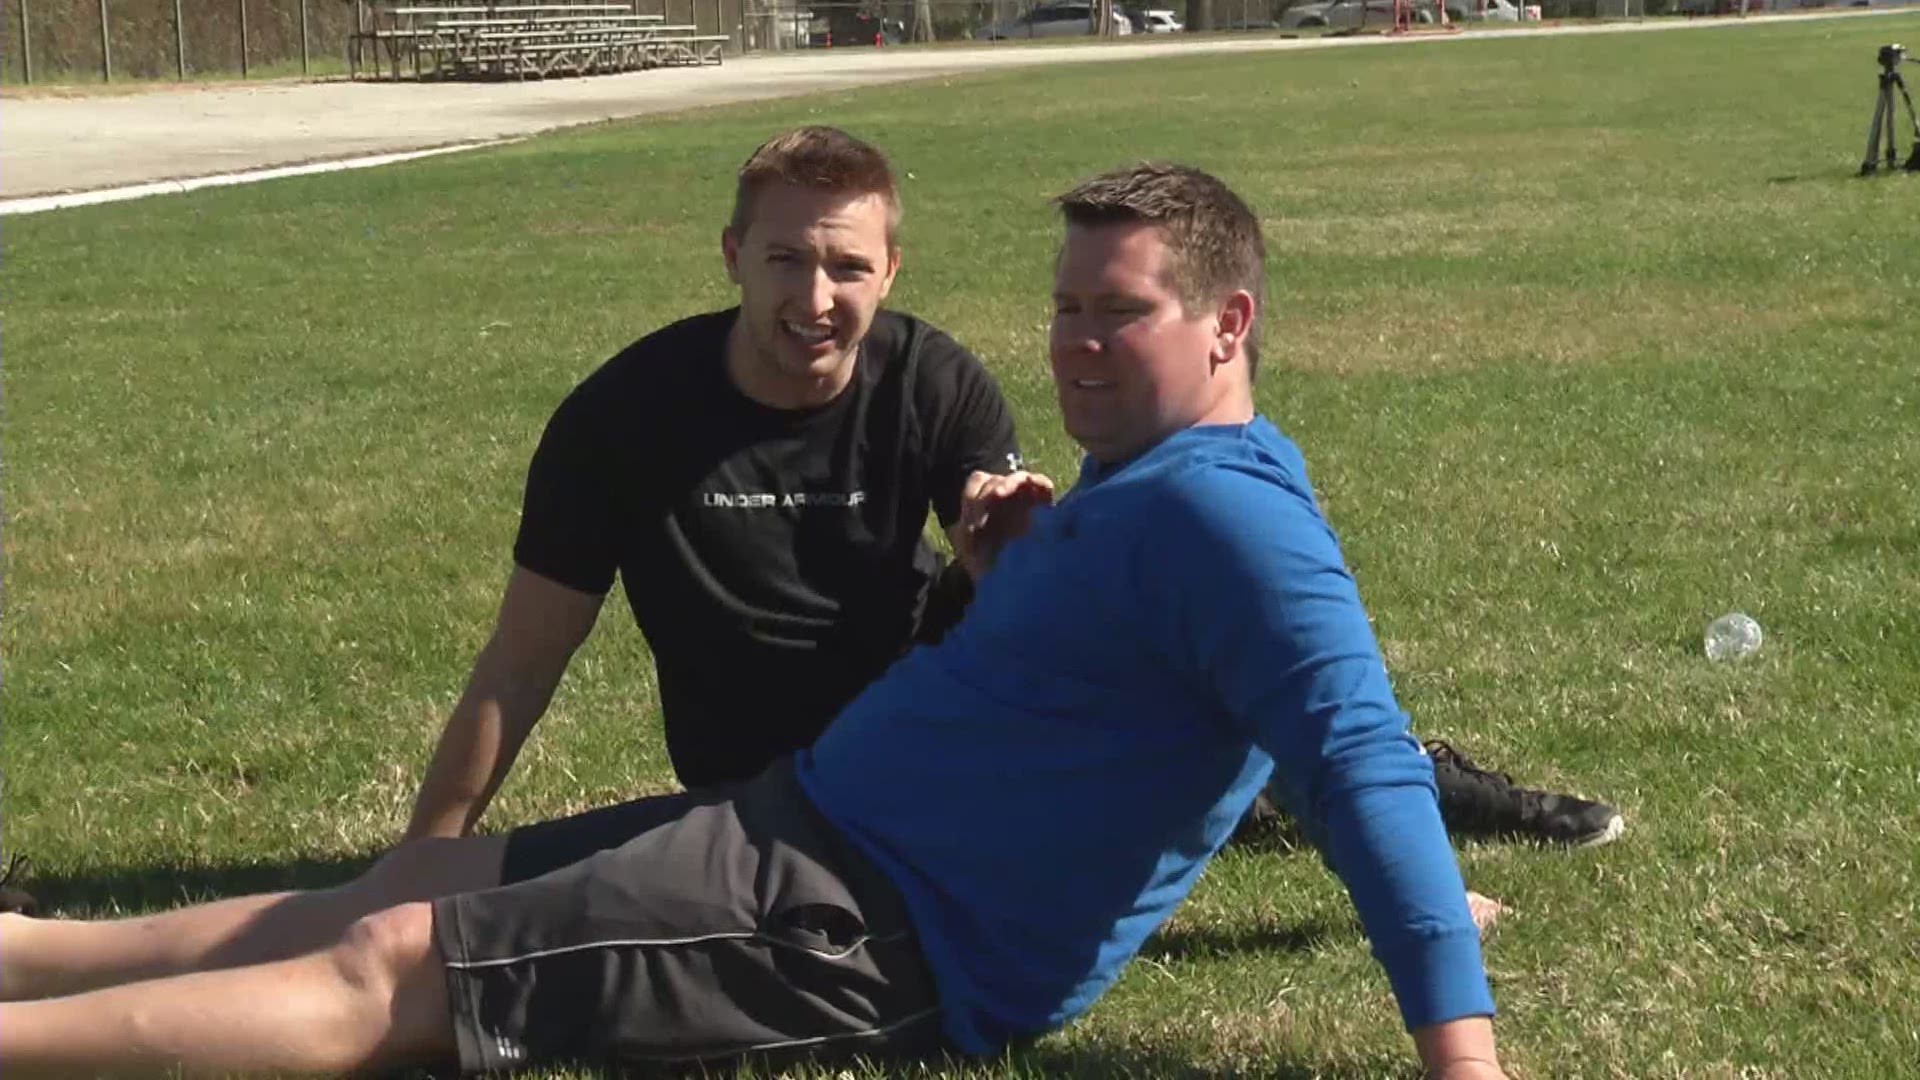 Justin Woodard & Mike Lucas attempt to walk-on to the Blinn football team. The tryout did not go very well.